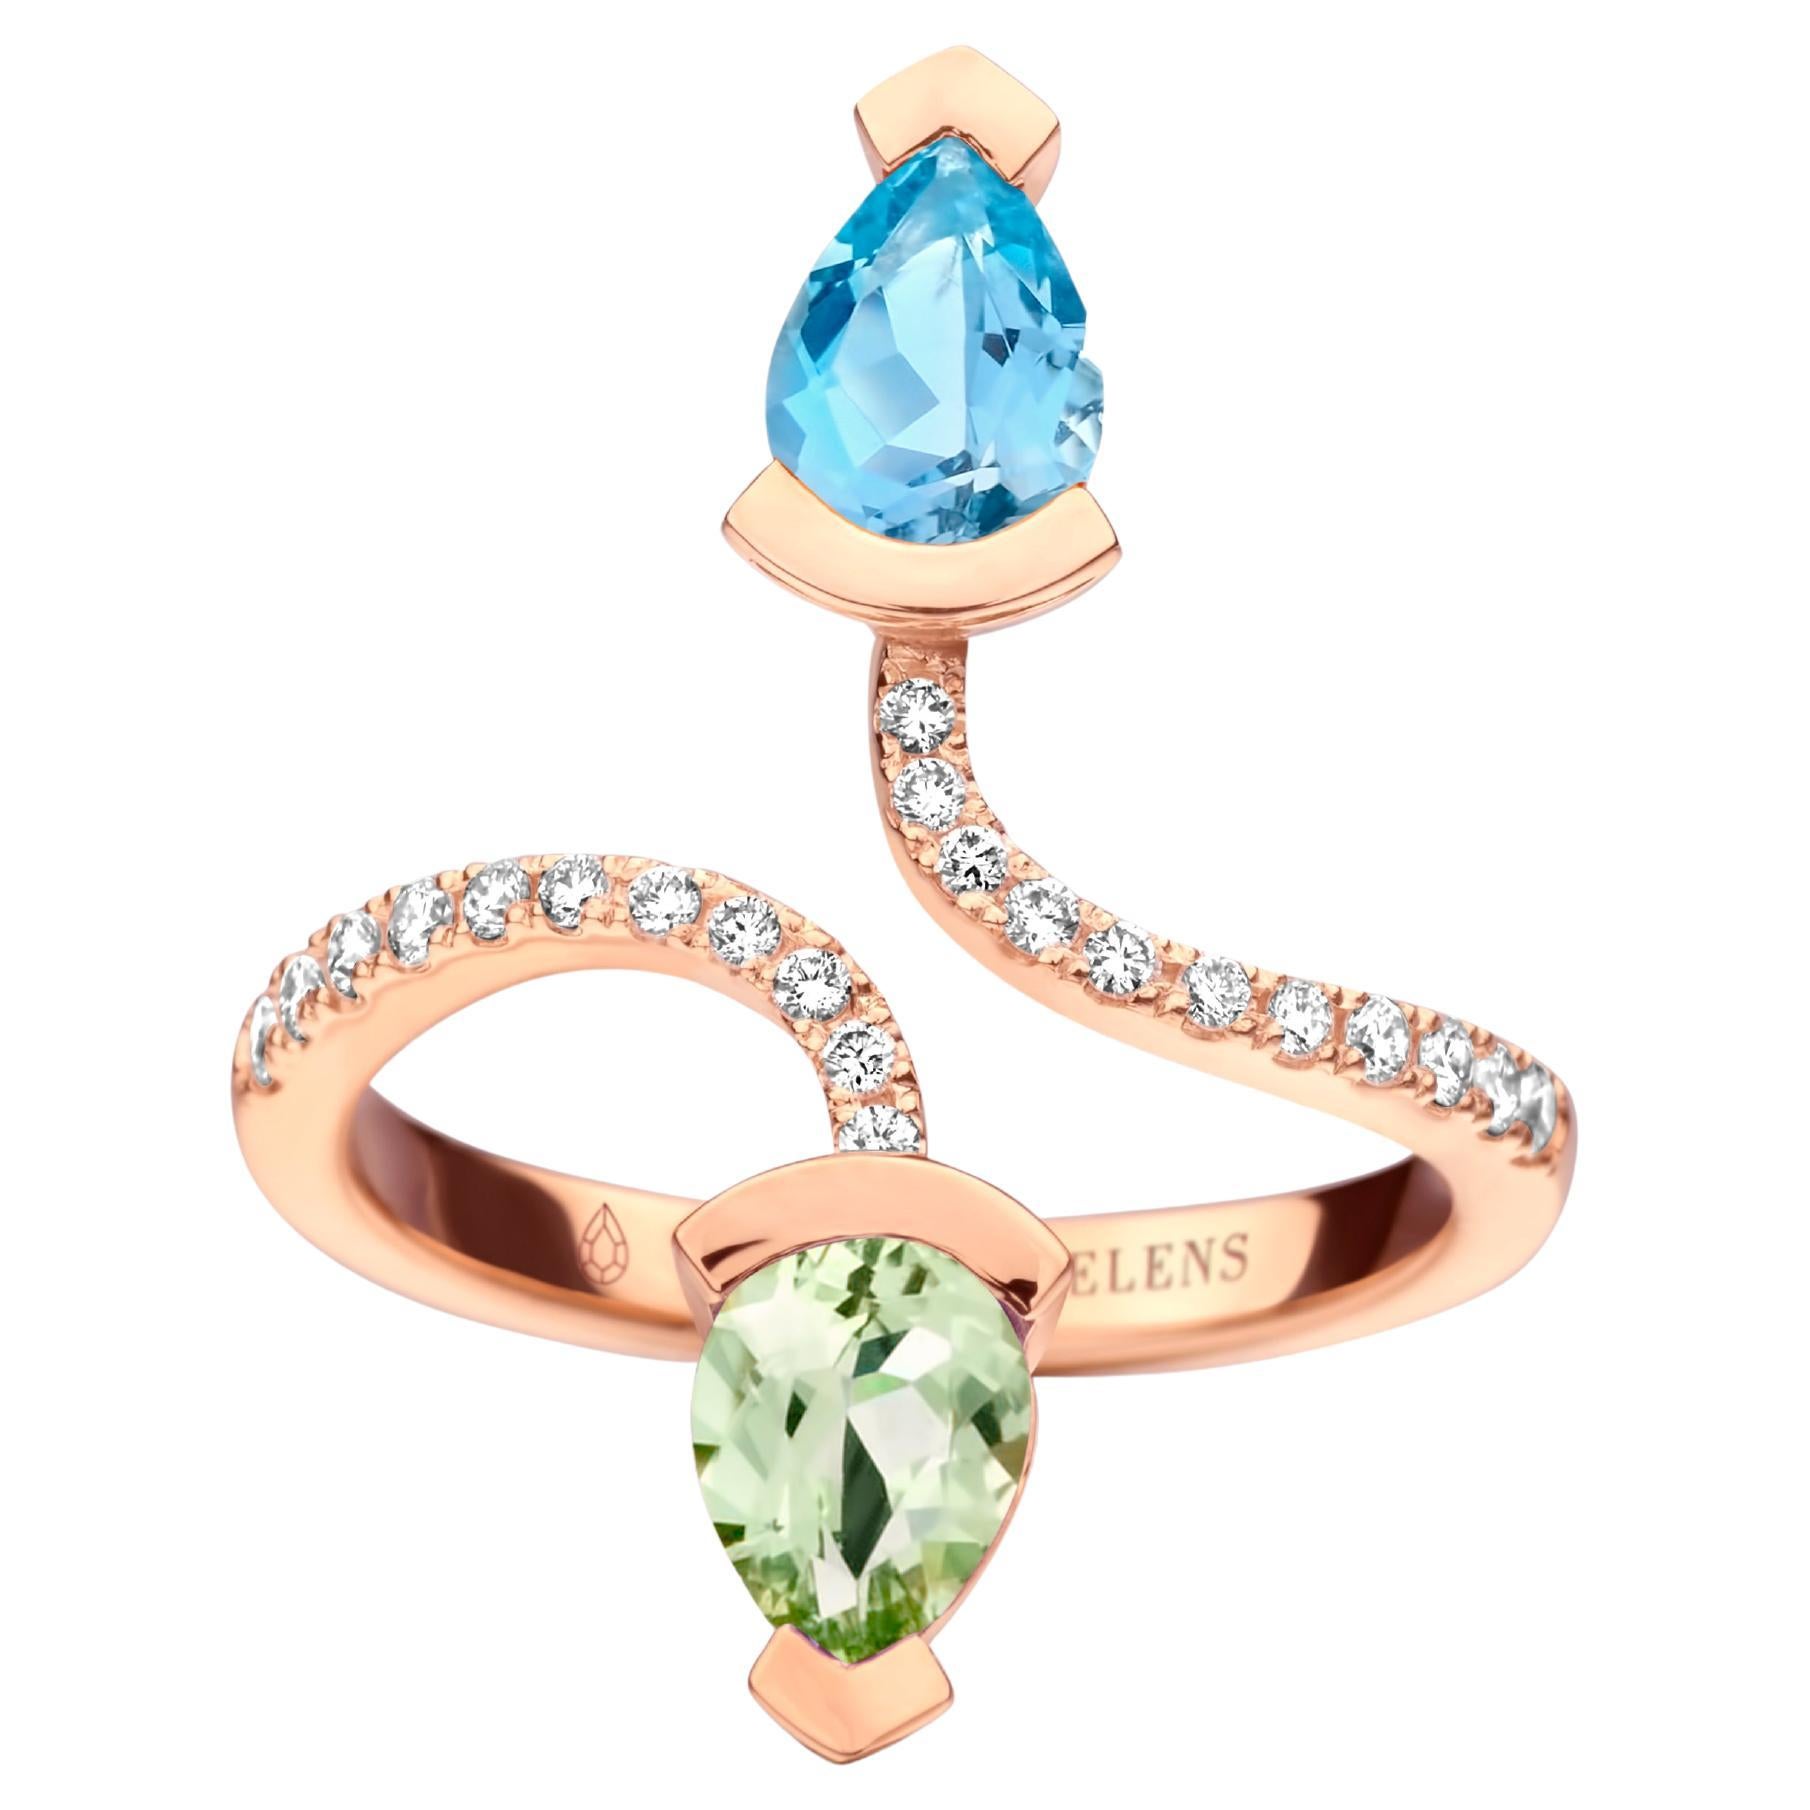 0.78Ct Aquamarine And 0.70Ct Green Beryl 18K Rose Gold Diamond Cocktail Ring For Sale